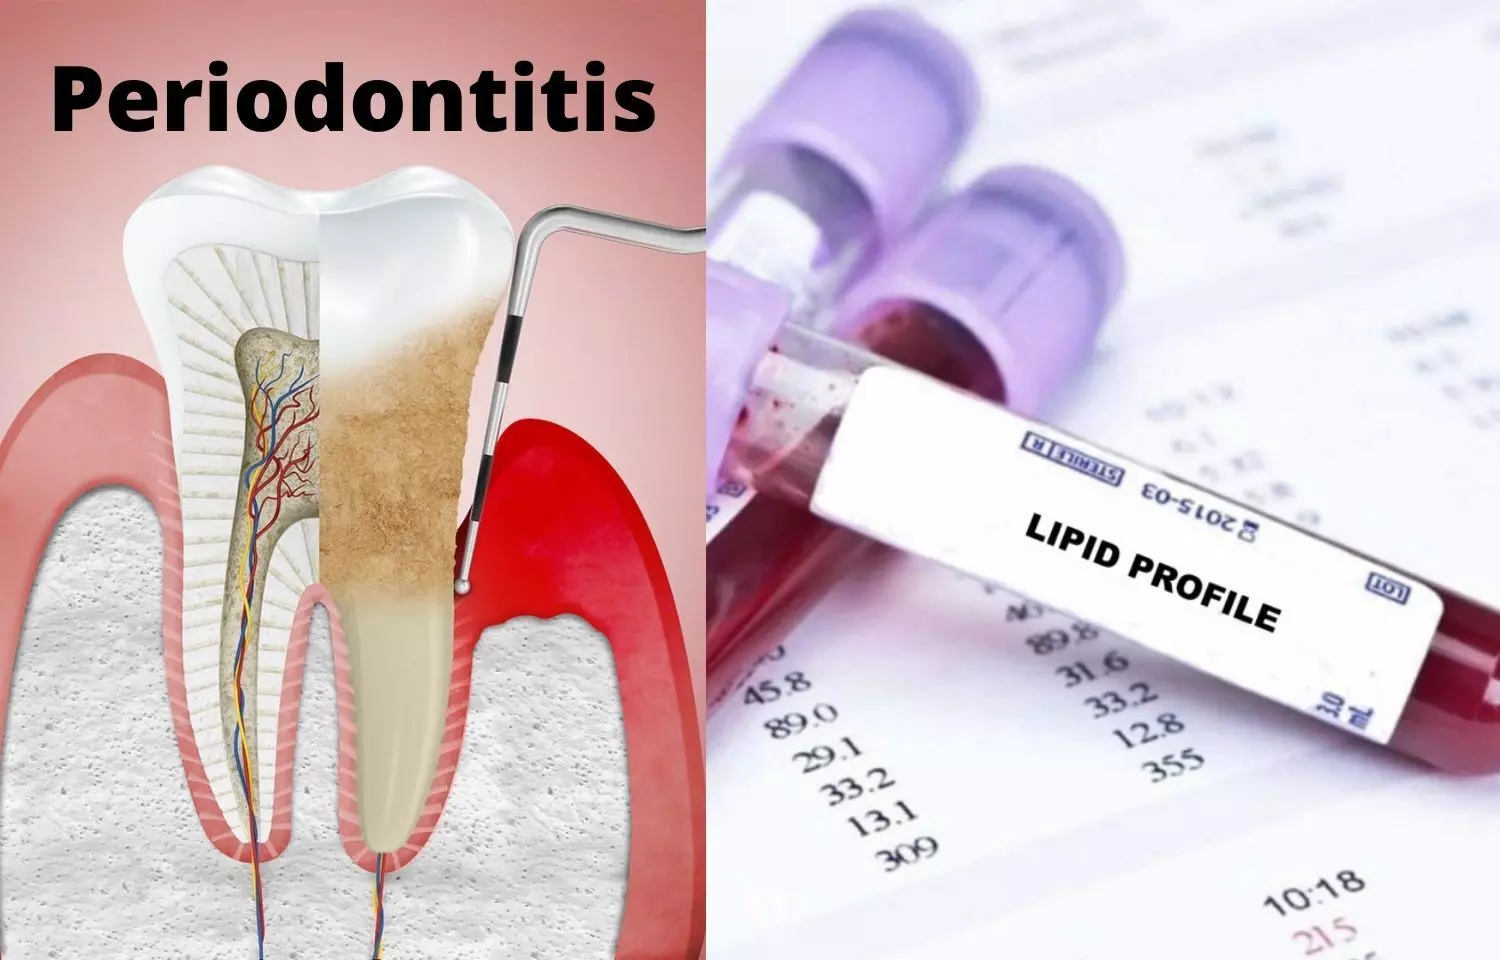 Periodontitis tied to increased risk of dyslipidemia: Study